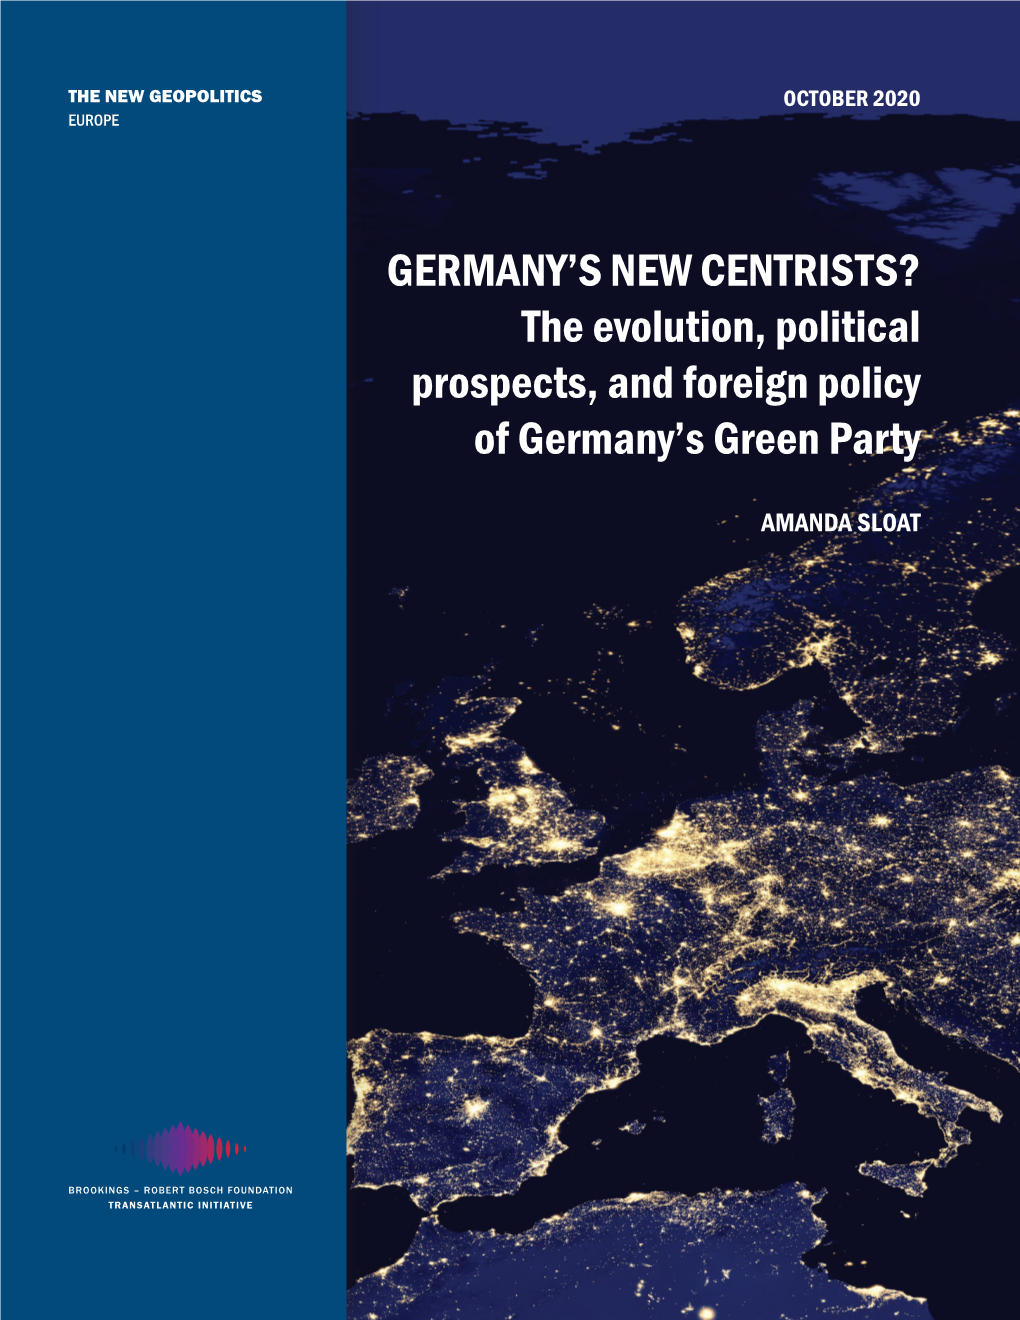 The Evolution, Political Prospects, and Foreign Policy of Germany's Green Party